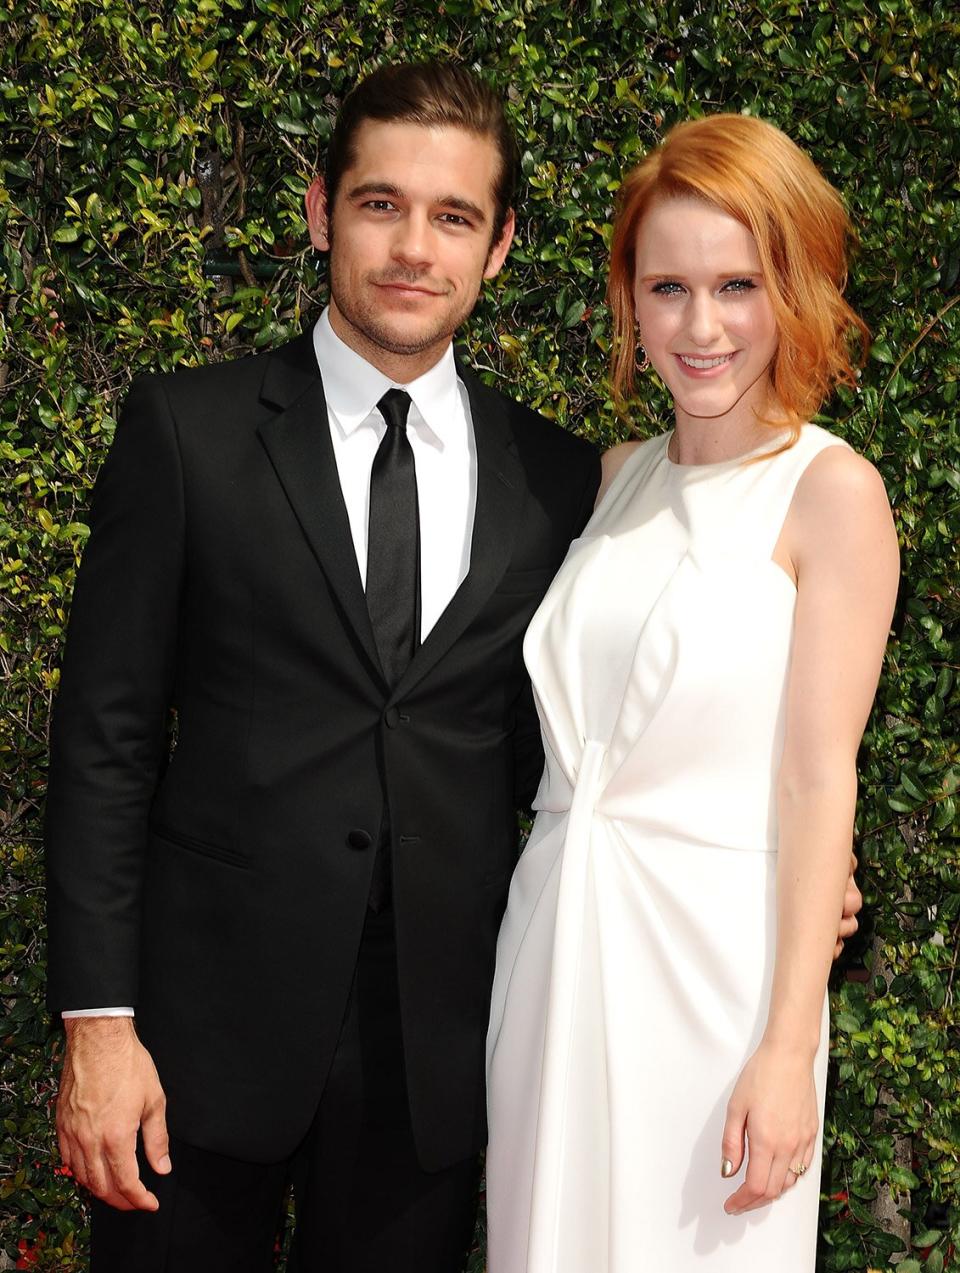 LOS ANGELES, CA - SEPTEMBER 12: Actor Jason Ralph and actress Rachel Brosnahan attend the 2015 Creative Arts Emmy Awards at Microsoft Theater on September 12, 2015 in Los Angeles, California. (Photo by Jason LaVeris/FilmMagic)